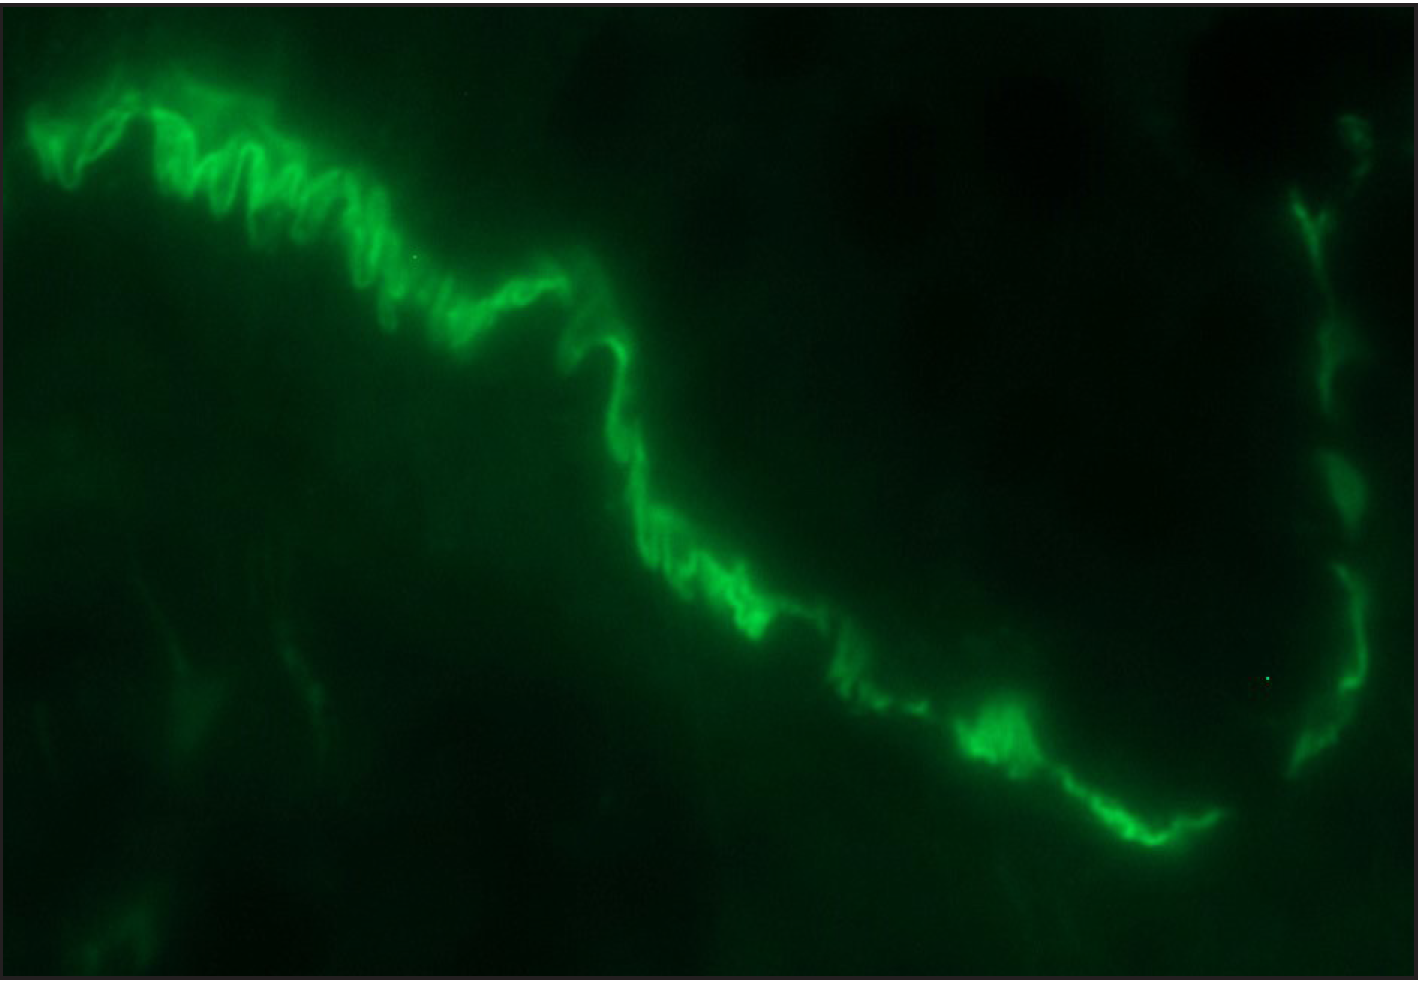 Direct immunofluorescence (DIF) high power examination in a case of bullous pemphigoid showing “n” serrated pattern (fluorescein isothiocyanate, ×1000 under oil immersion)